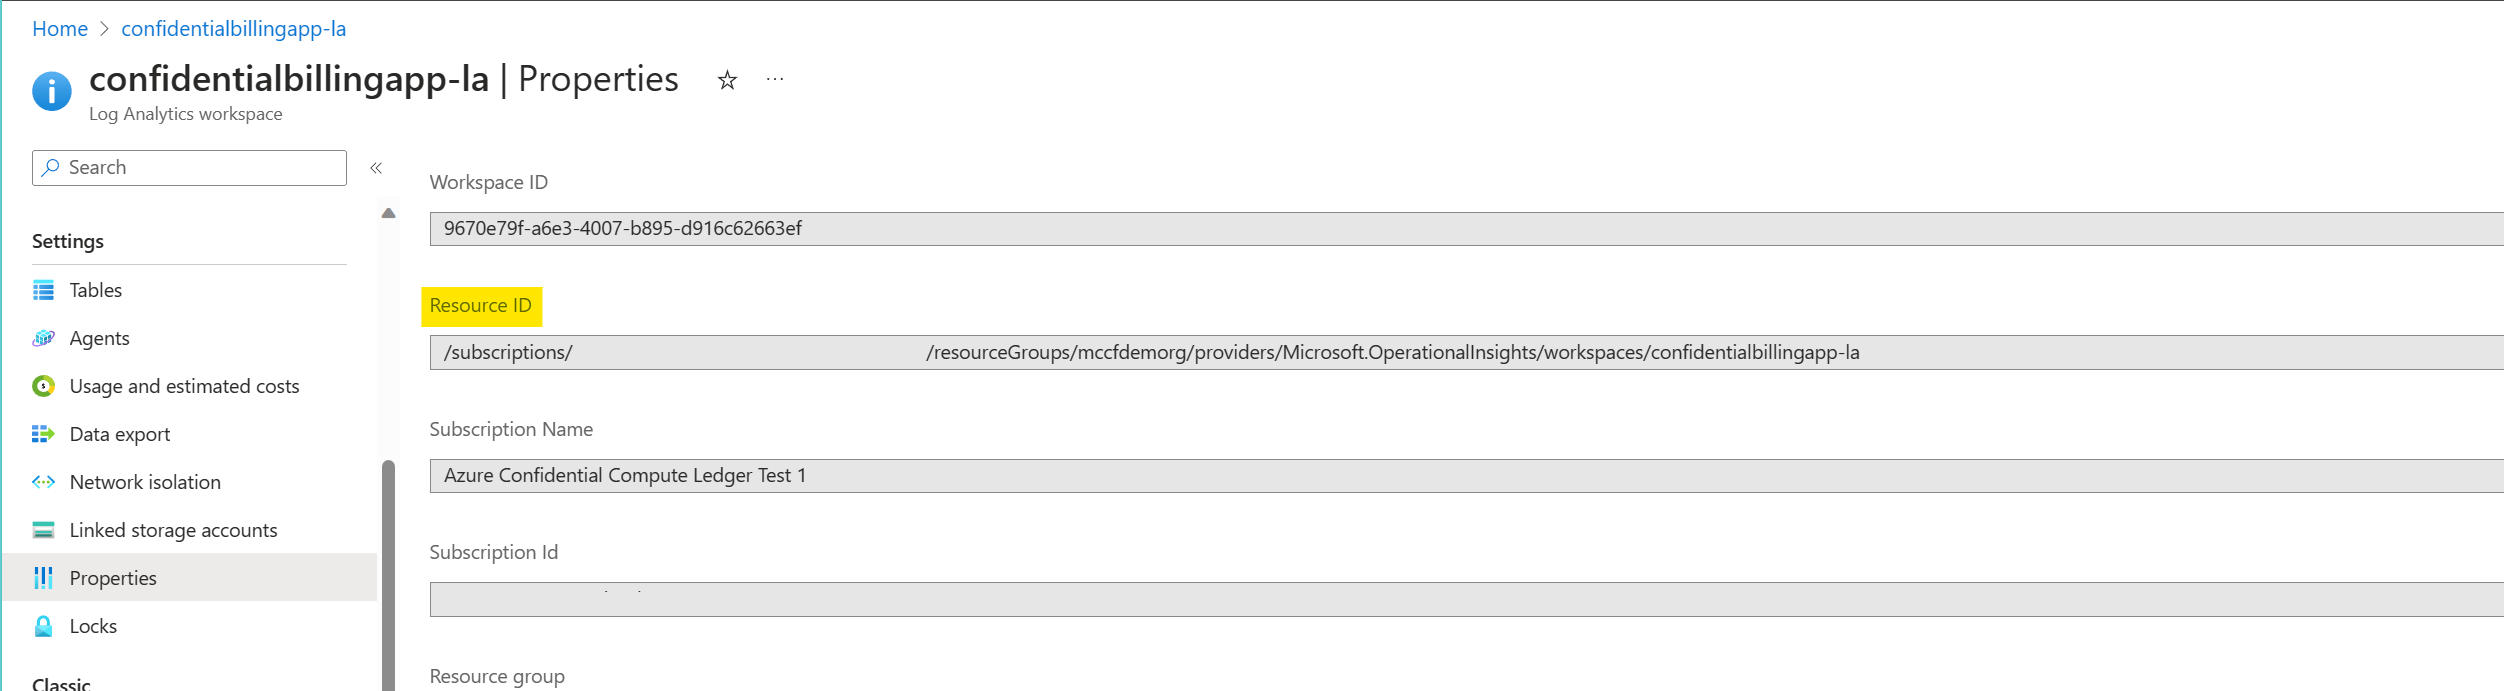 Screenshot that shows the properties of a Log Analytics workspace screen.